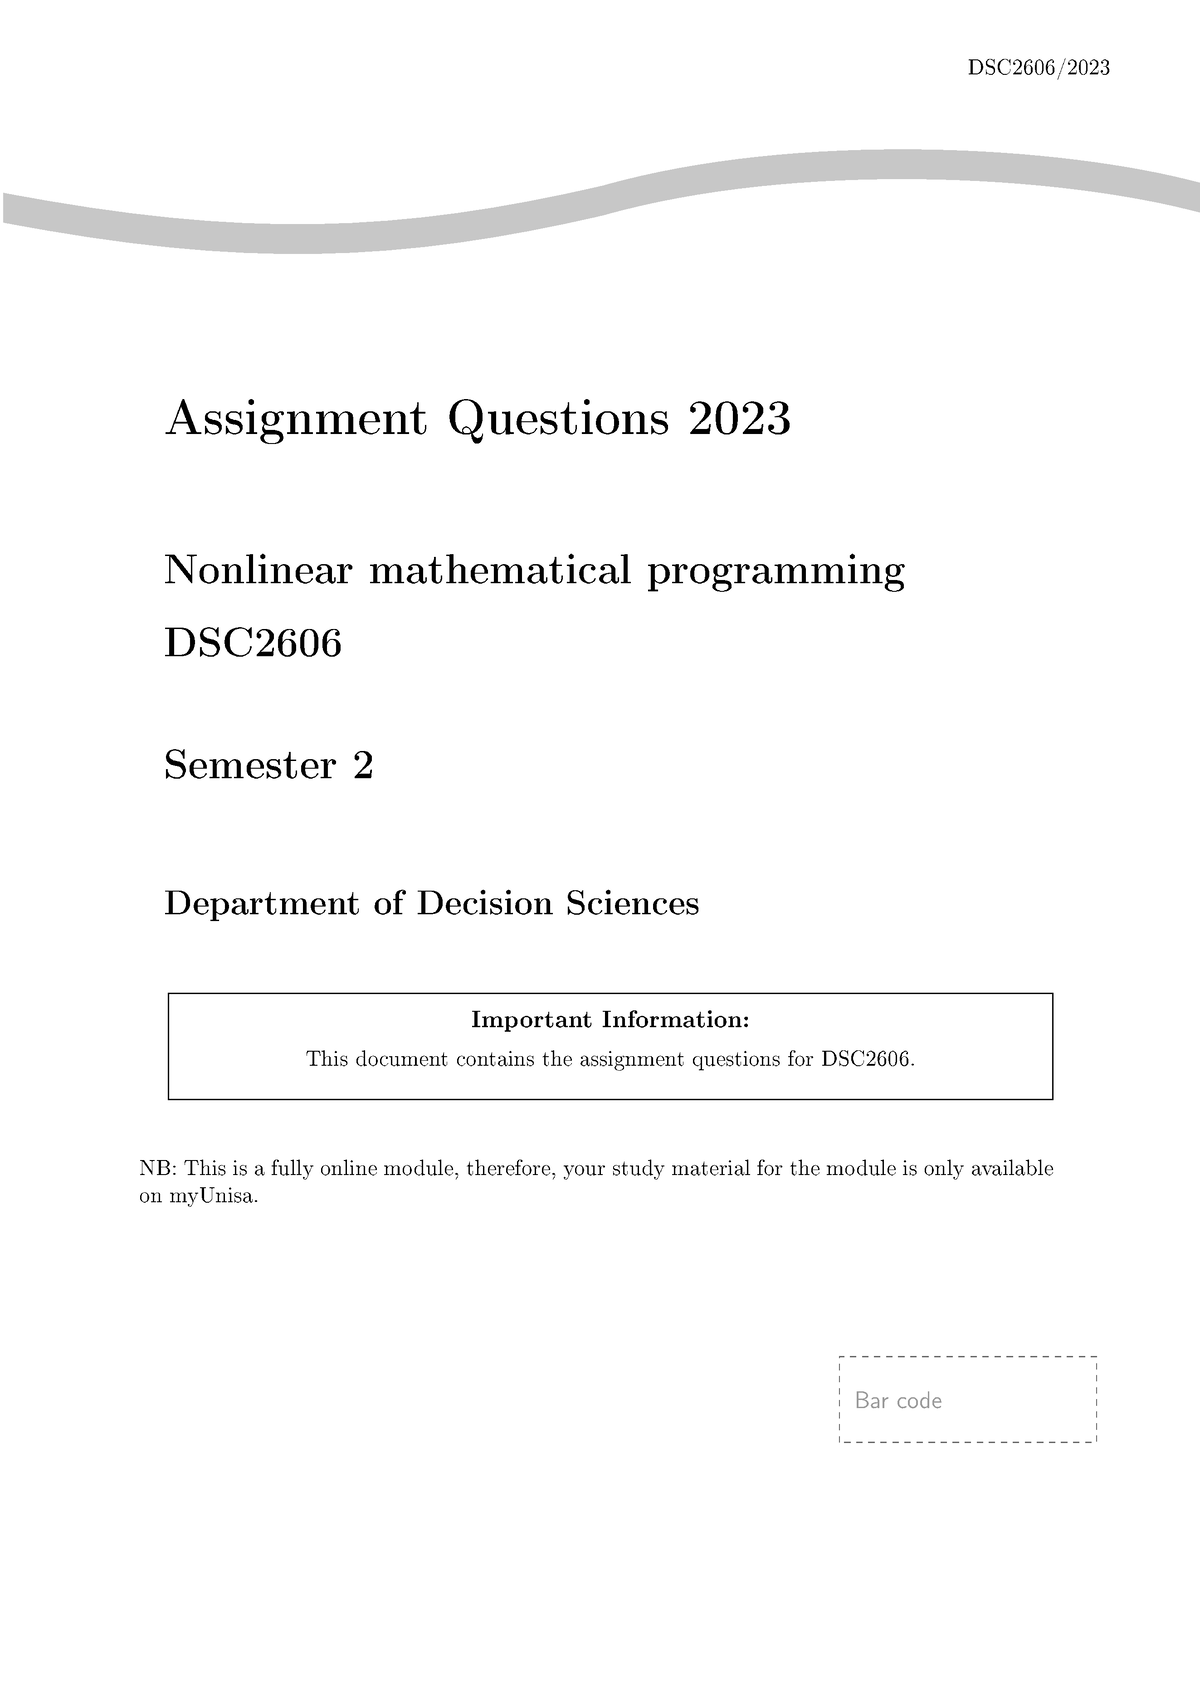 assignment questions 2023